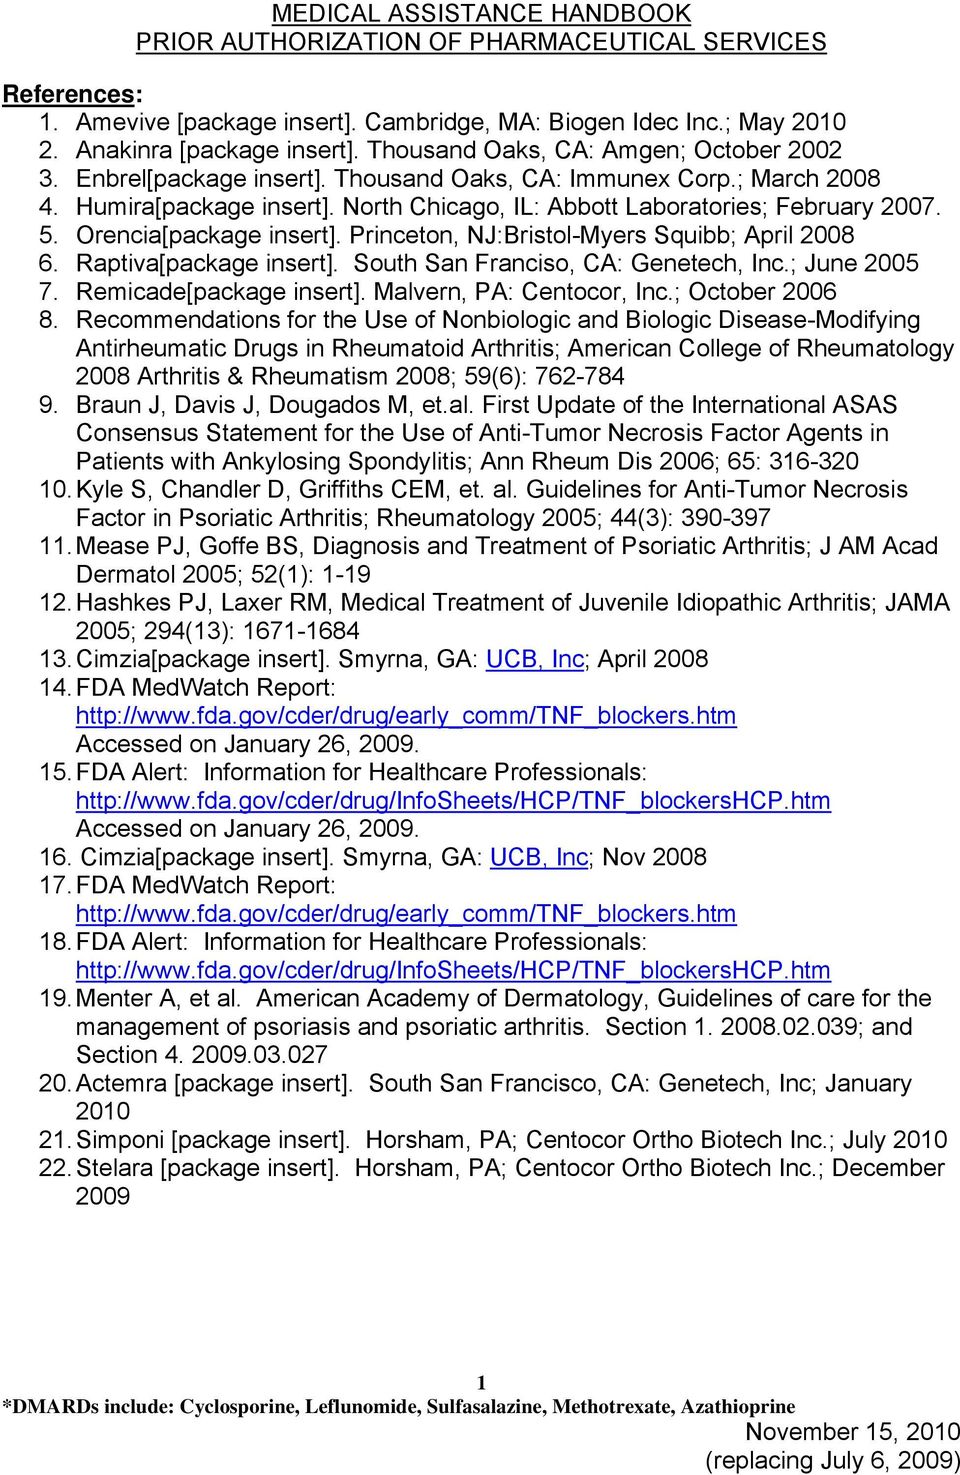 Princeton, NJ:Bristol-Myers Squibb; April 2008 6. Raptiva[package insert]. South San Franciso, CA: Genetech, Inc.; June 2005 7. Remicade[package insert]. Malvern, PA: Centocor, Inc.; October 2006 8.